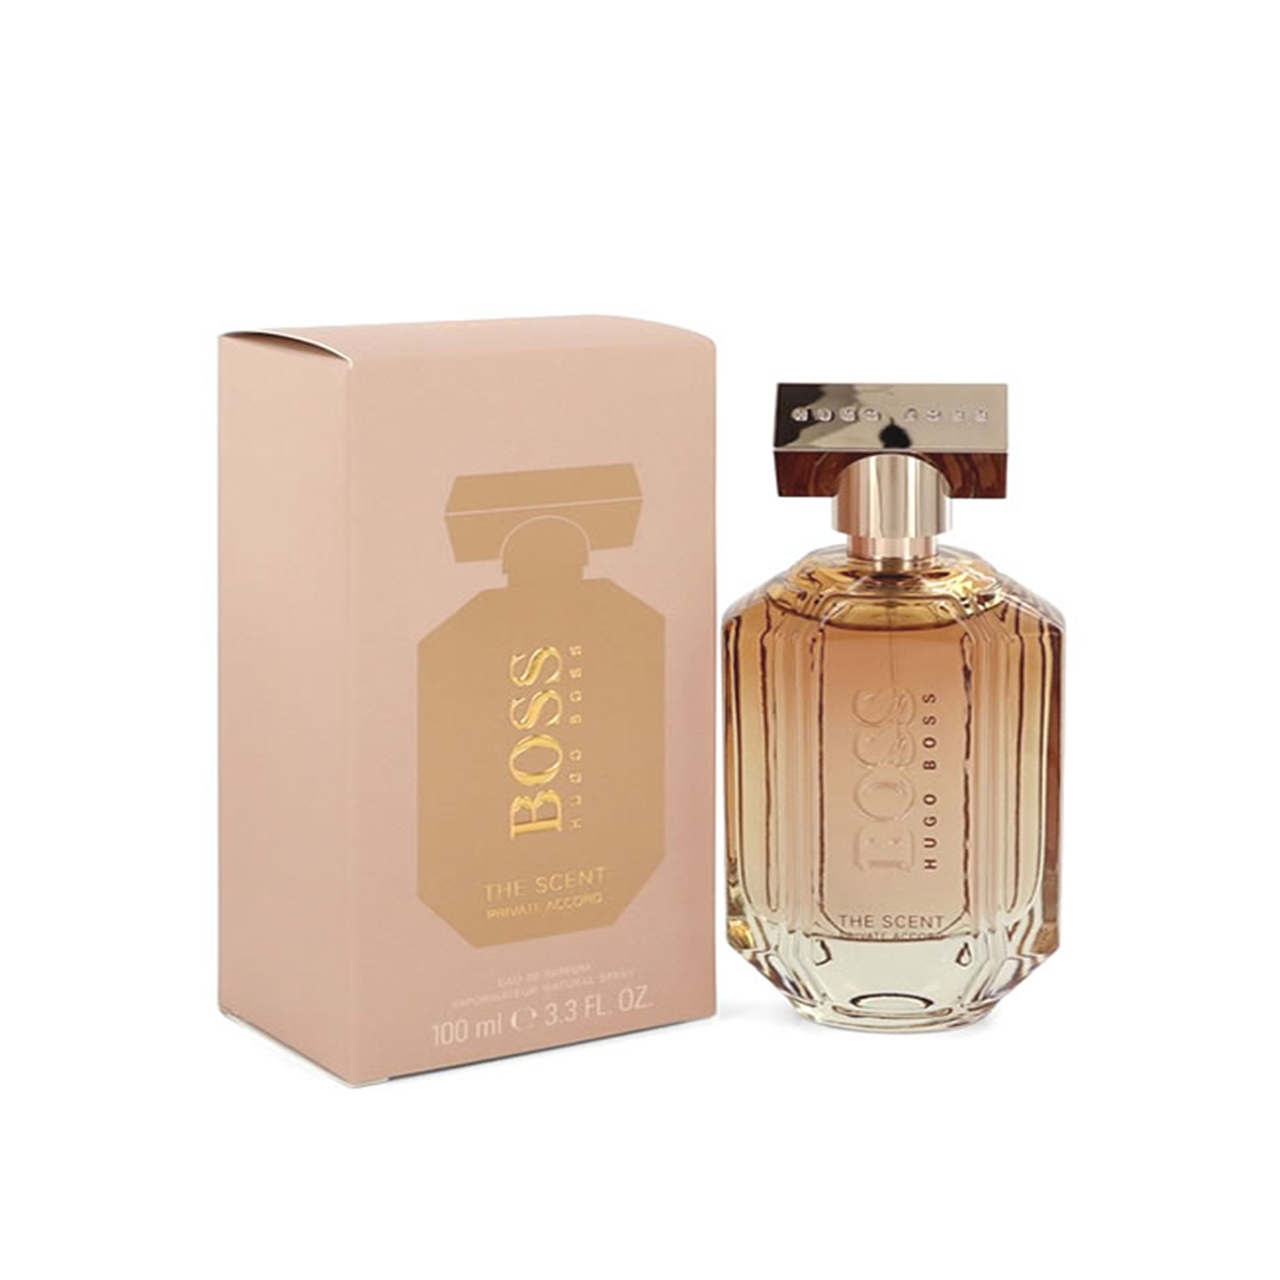 Цена духов босс в летуаль. Hugo Boss the Scent for her EDP, 100 ml. The Scent for her Eau de Parfum. Hugo Boss the Scent absolute for her. Пирамида Boss the Scent for her.